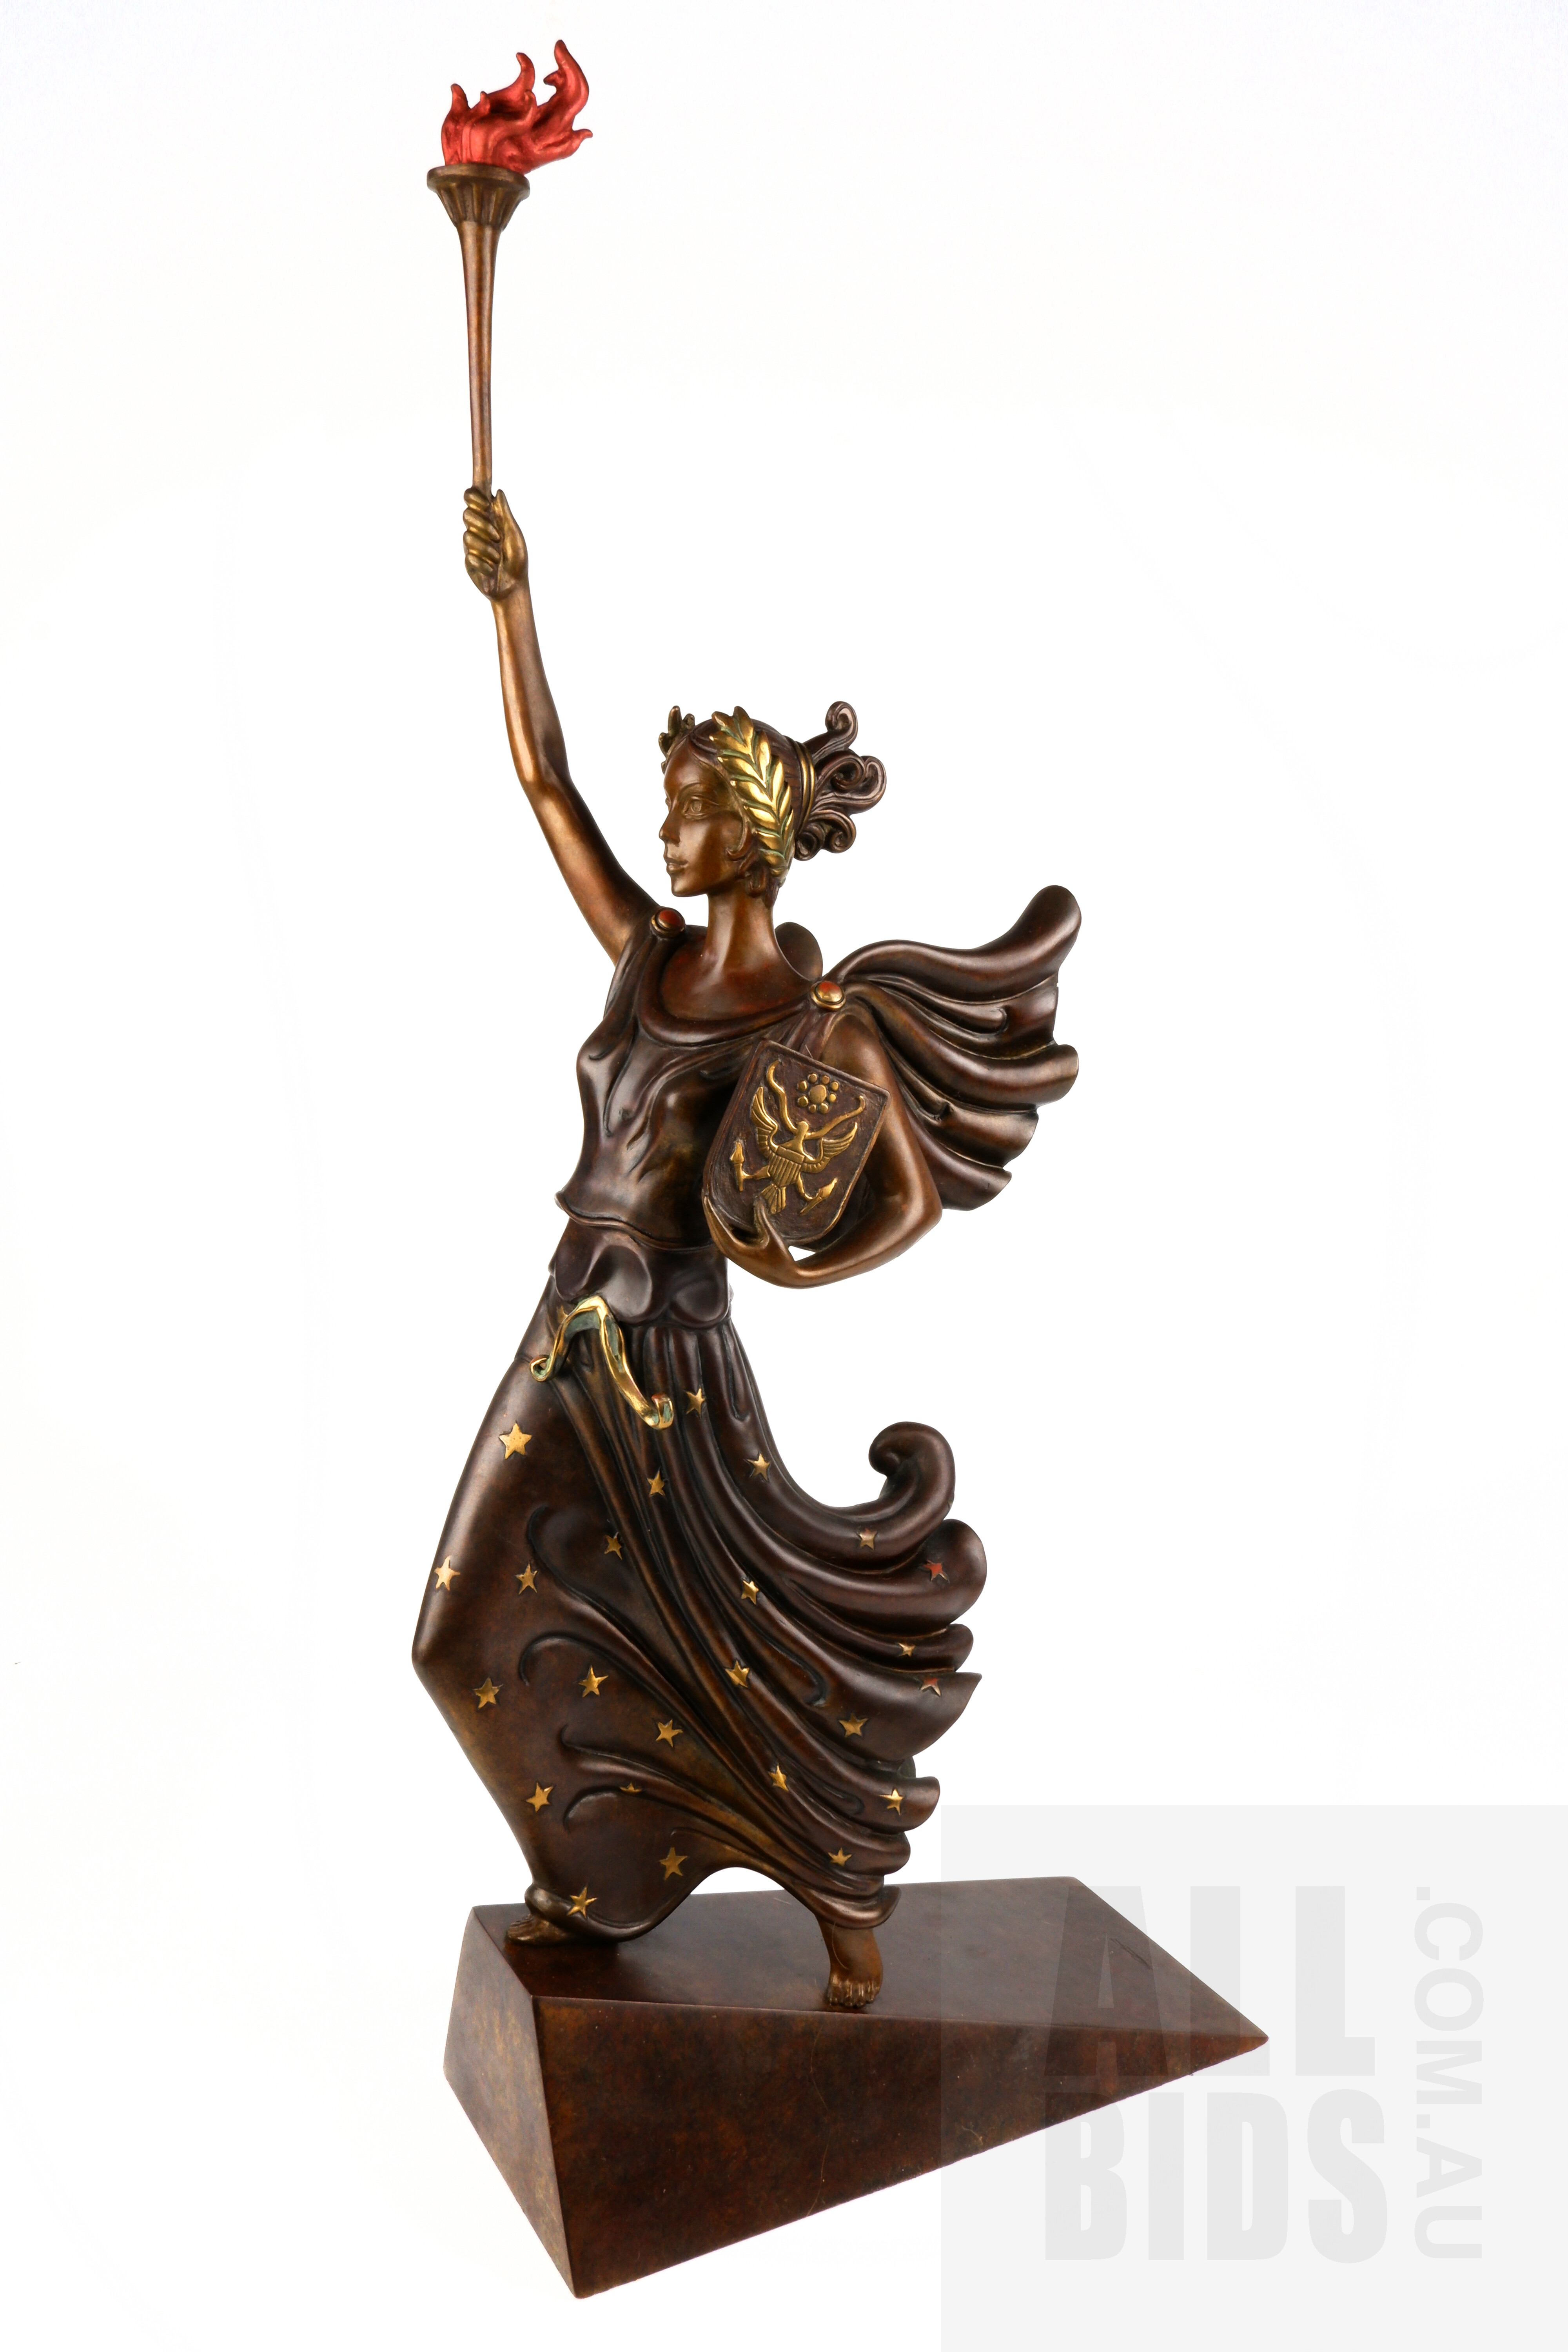 'Erte "Liberty, Fearless and Free" Bronze Sculpture, Published by Fine Art Acquisitions 1984, Edition 120/500'